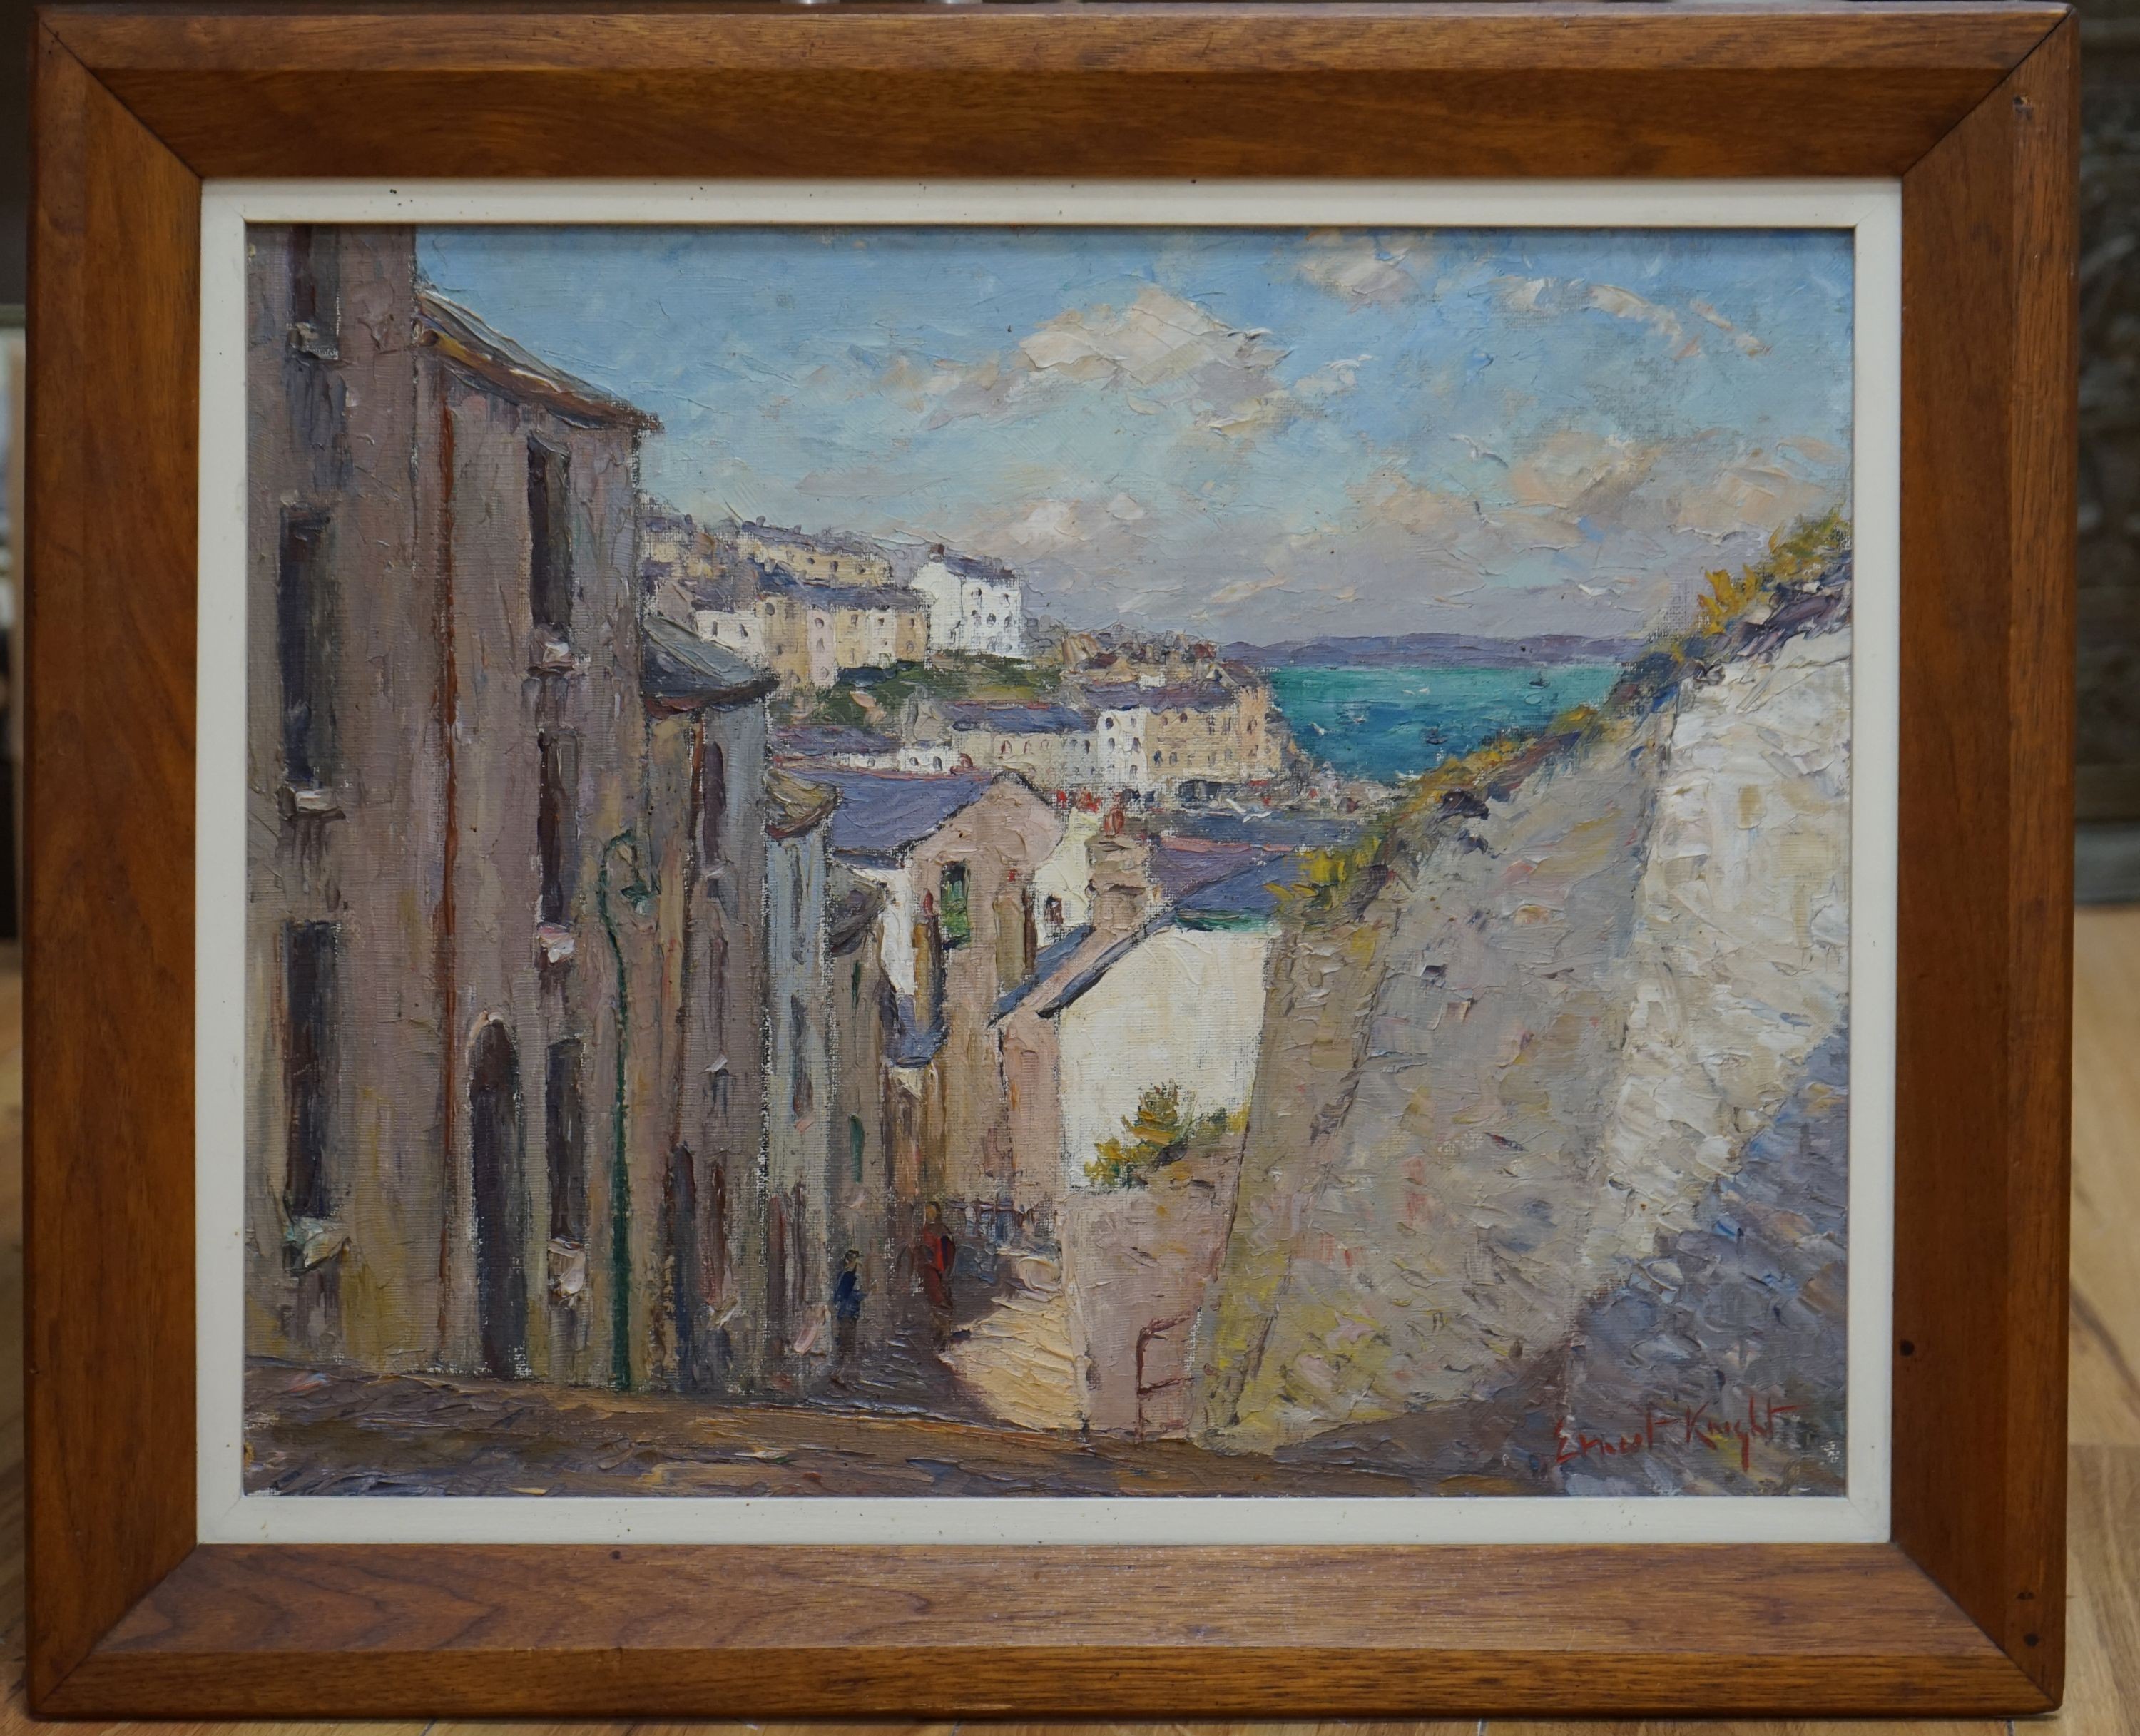 Ernest Knight (1915-1995), oil on canvas, ‘Temperance Steps, Brixham, Devon’, signed and inscribed verso, 40 x 50cm